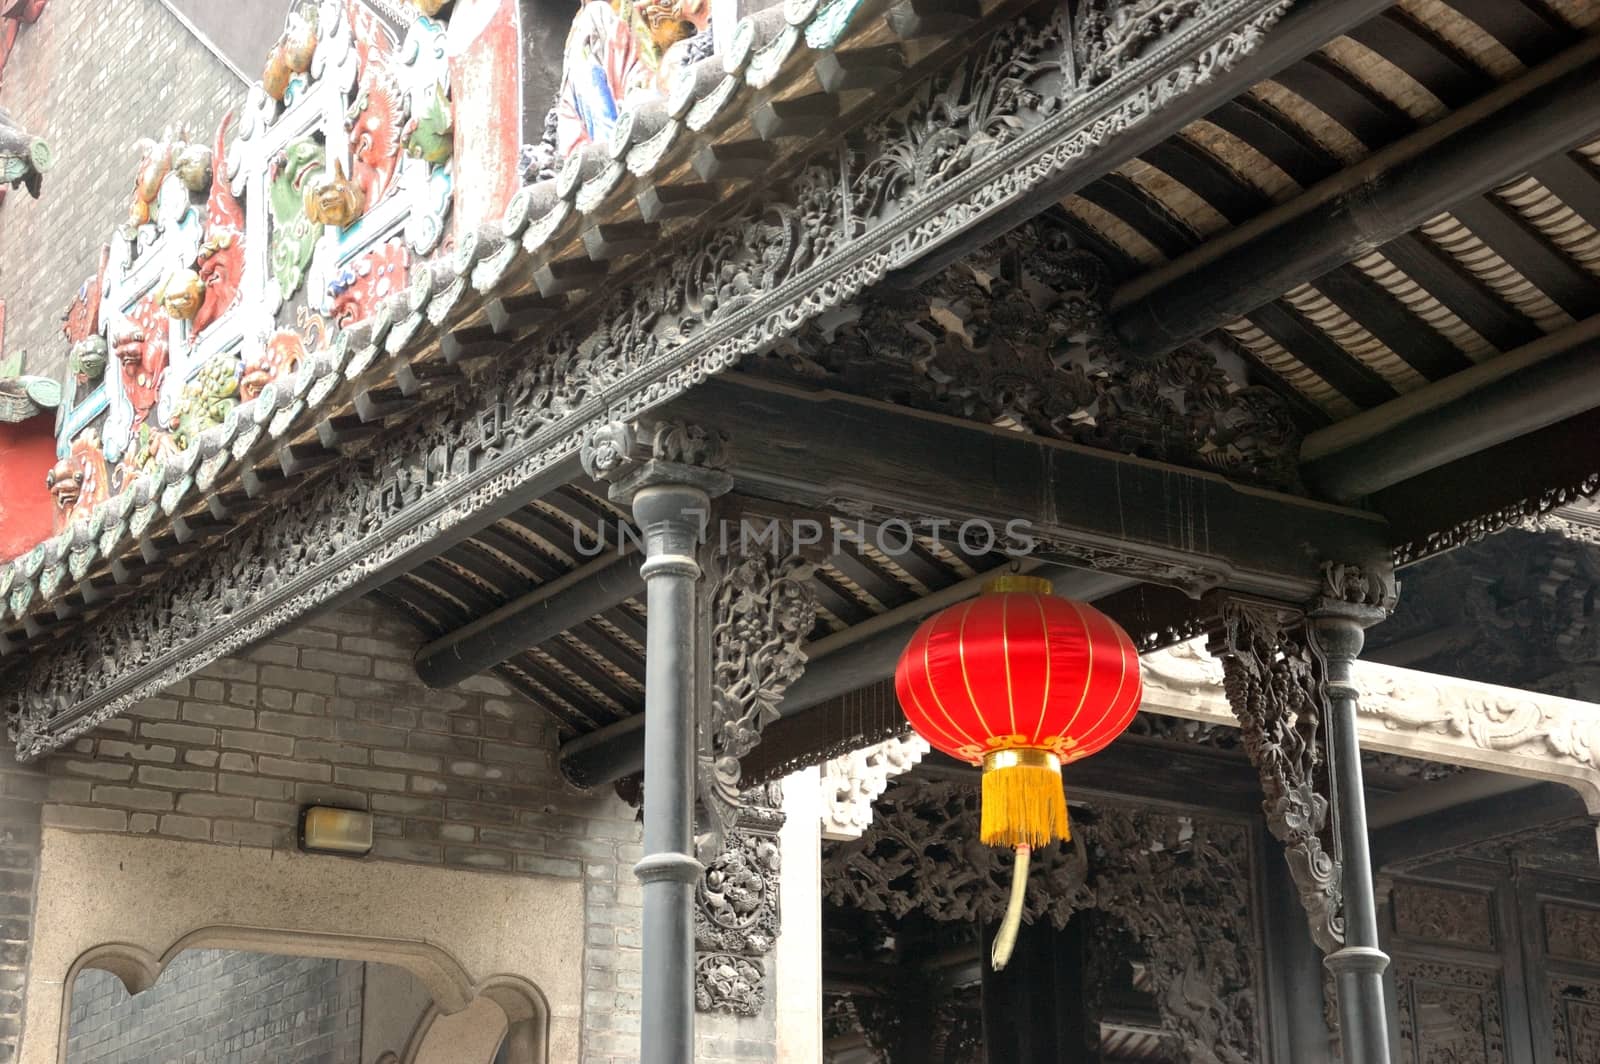 Historical roofs inside Chen Family Temple in Guangzhou, China. Roofs and colums with colorful decorations.